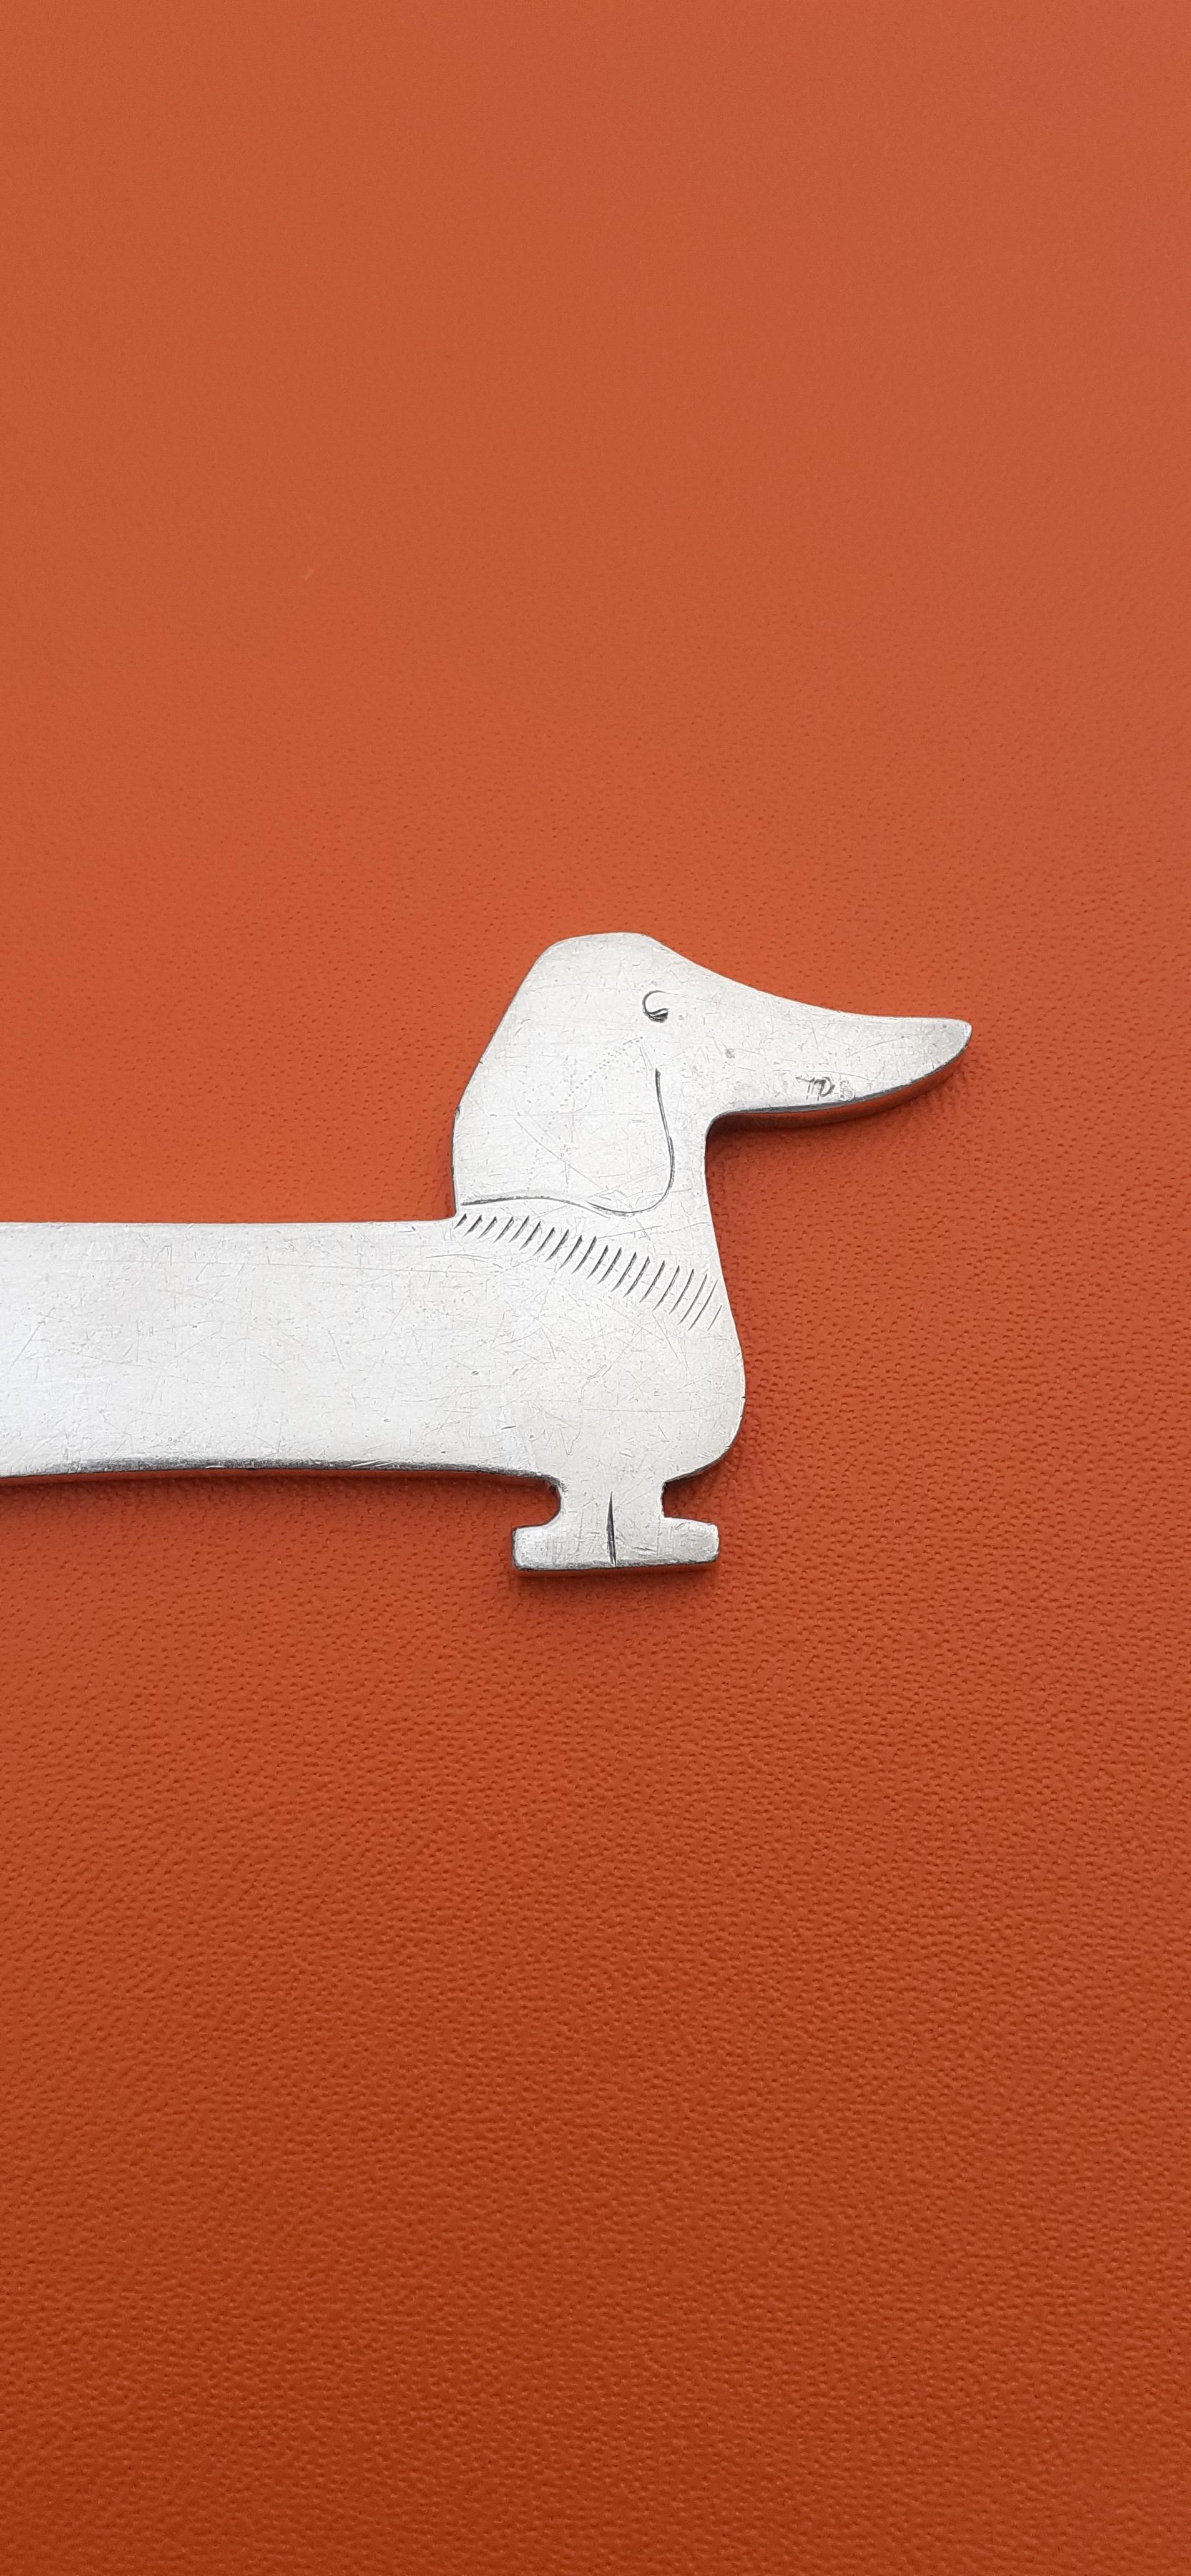 Exceptional Authentic Hermès Letter Opener

Absolutely stunning, a rare collector item

Dachshund Dog shaped

Vintage Item ! Super Rare, a Grail

Made of non precious metal

Colorway: silvery

